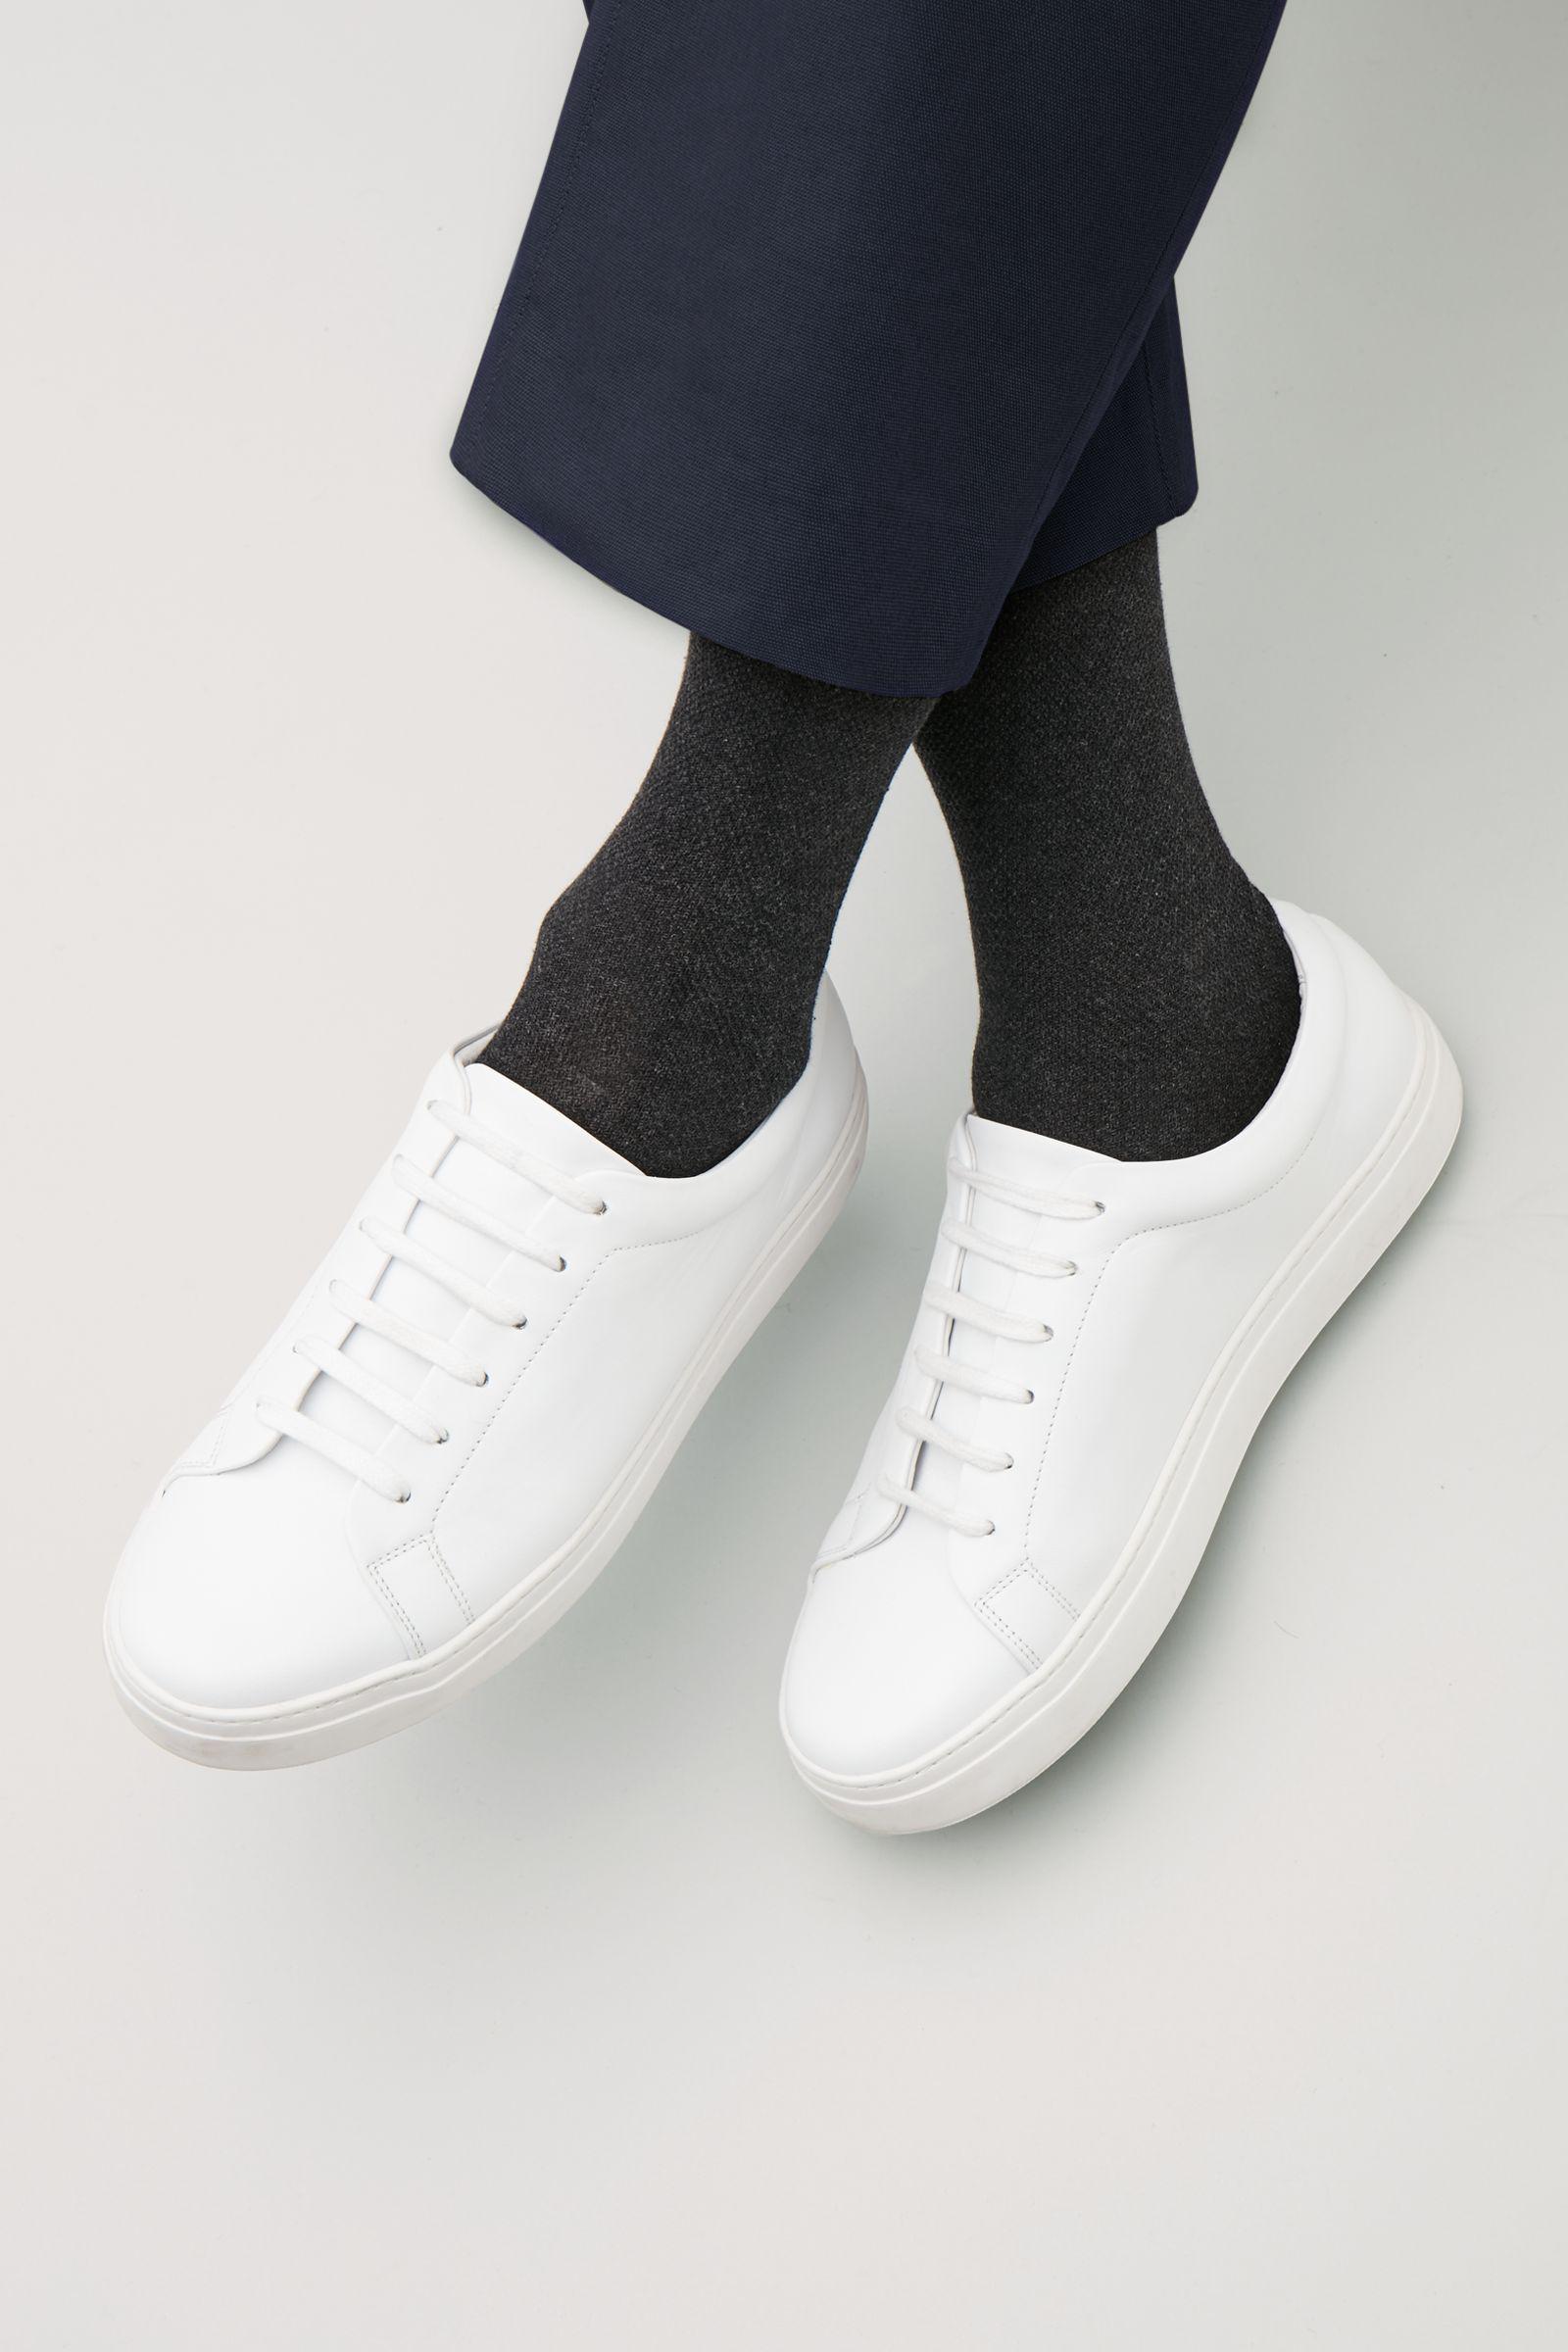 COS Lace-Up Leather Sneakers in White for Men - Lyst